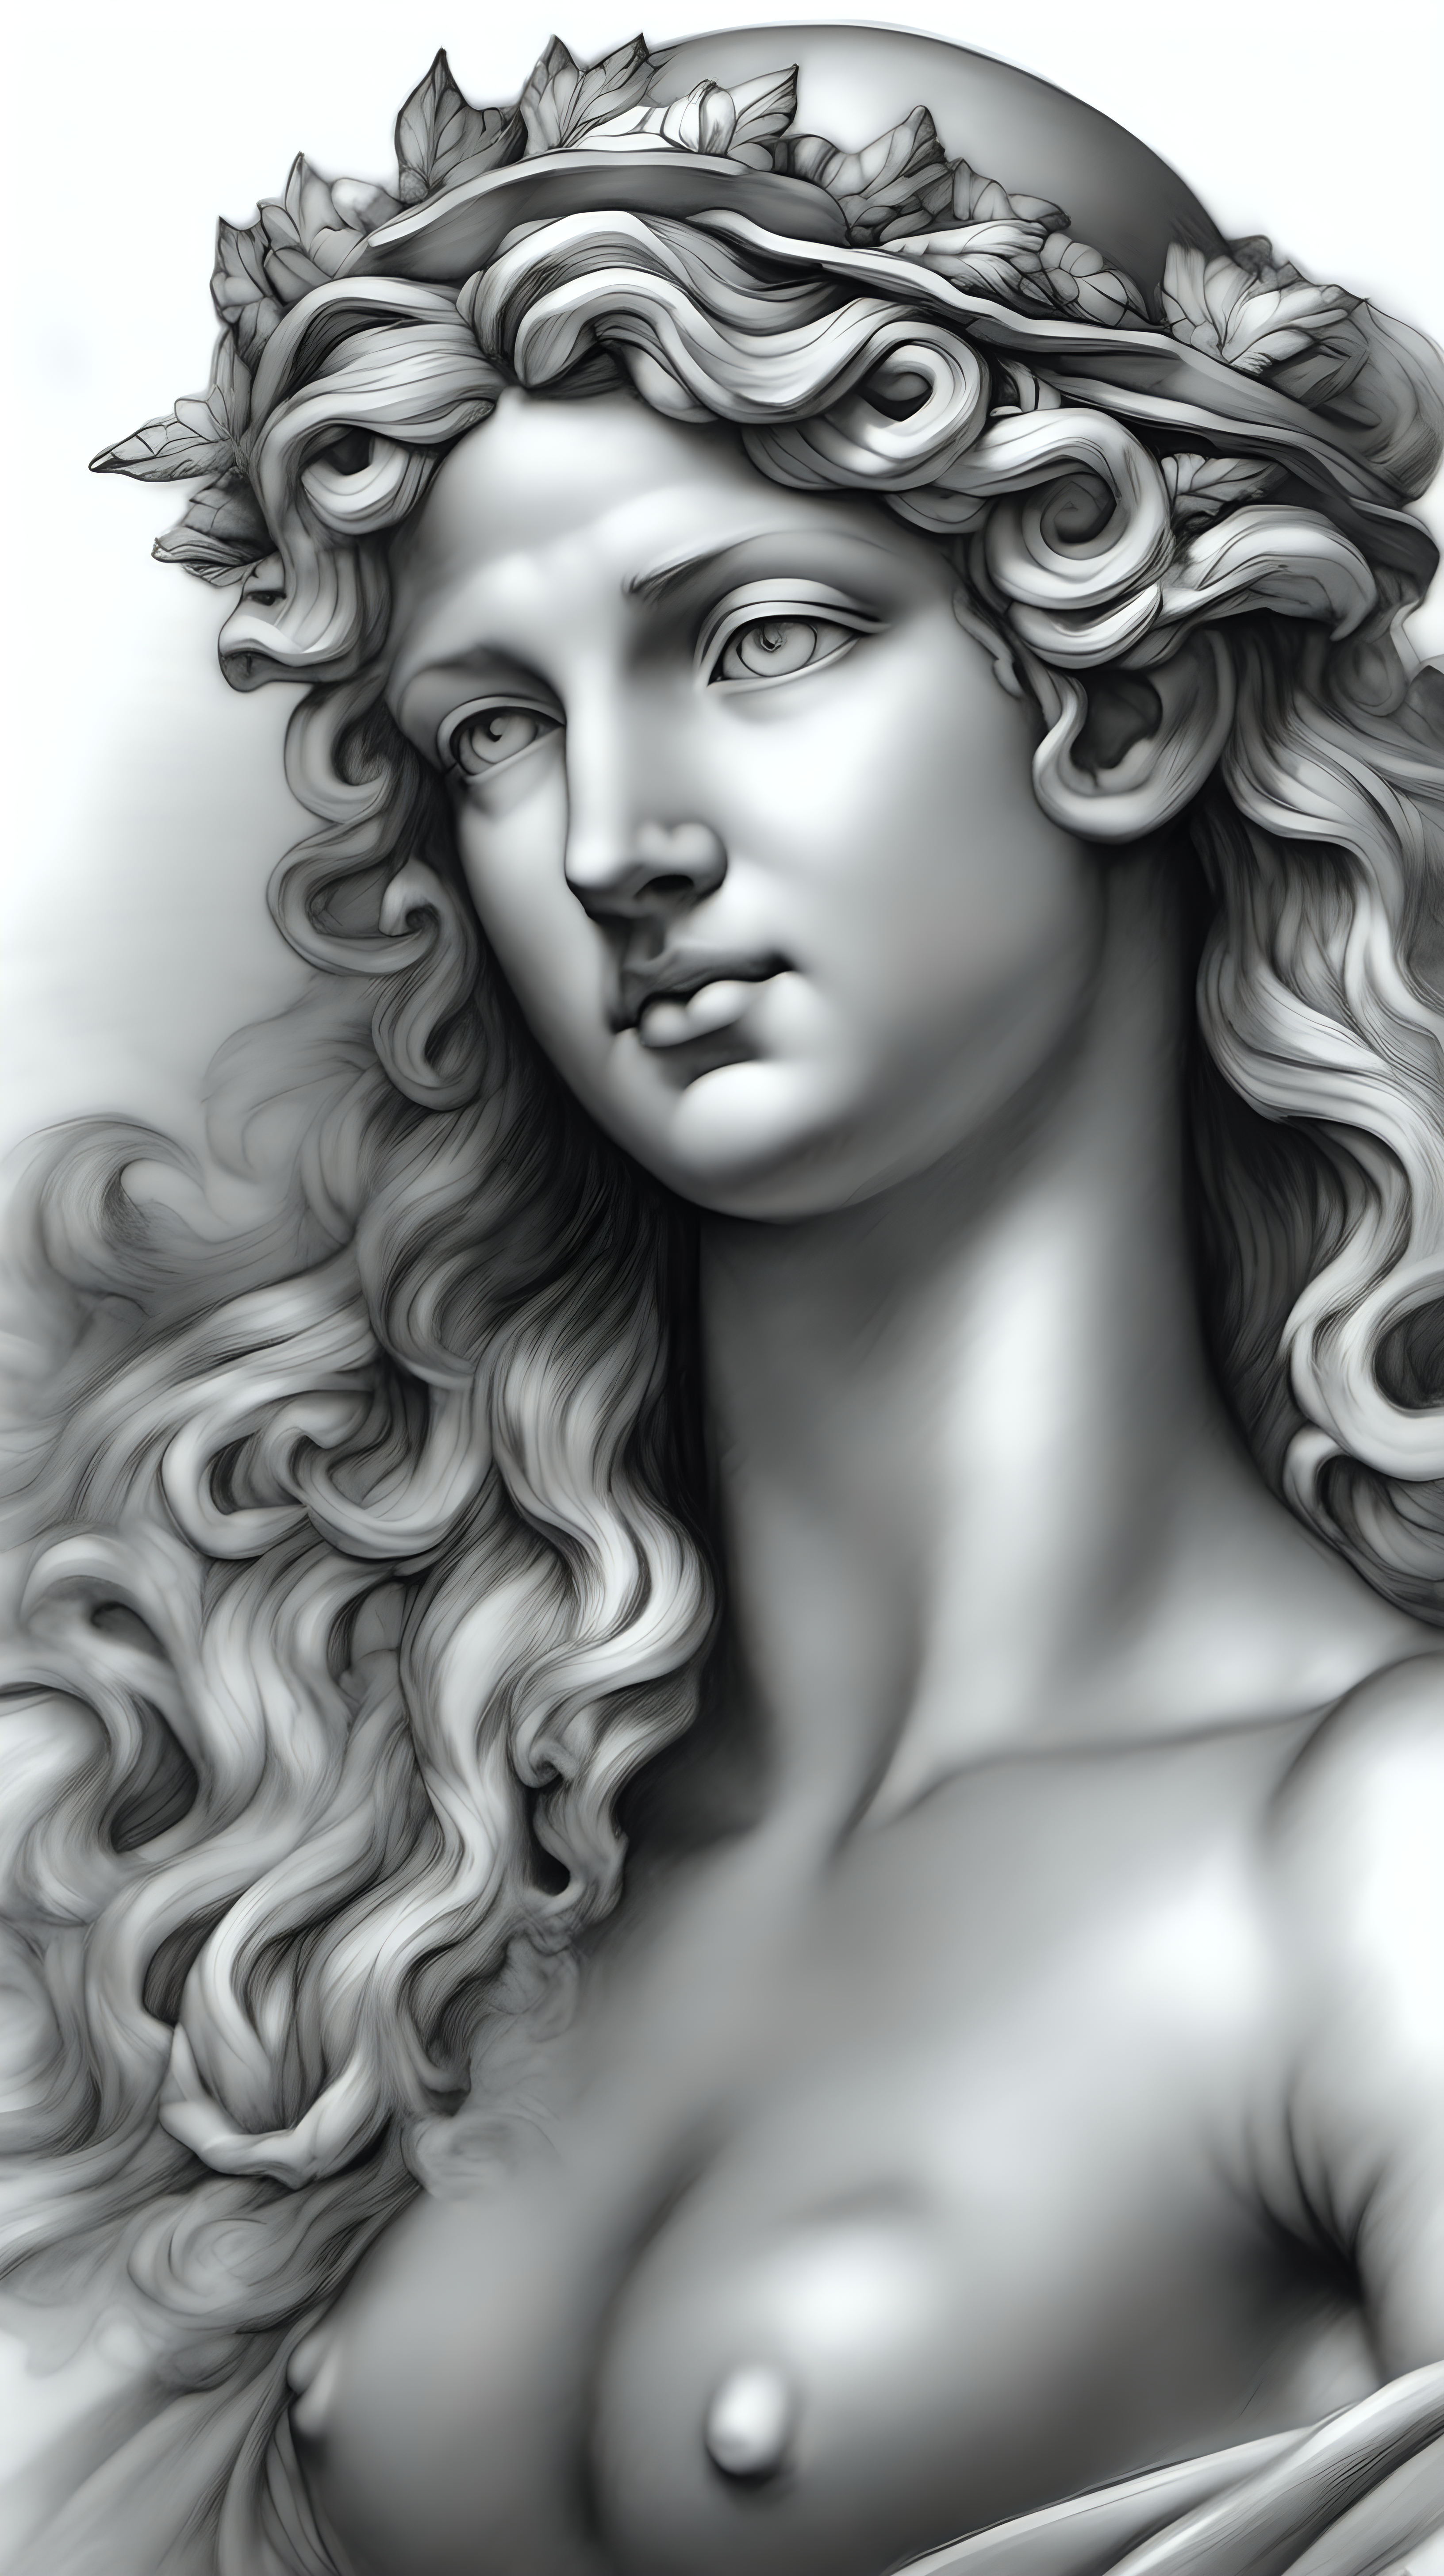 /imagine prompt : a hyper realistic black and gray Michelangelo drawing, feauteted a beautiful aphrodite, zeus above her,god & godess greek mytology
/describe : aphrodite full body, standing ,whole subjects in the box.
-no cut
<background>white papaer
<style>pencil drawing
_ar 9:16